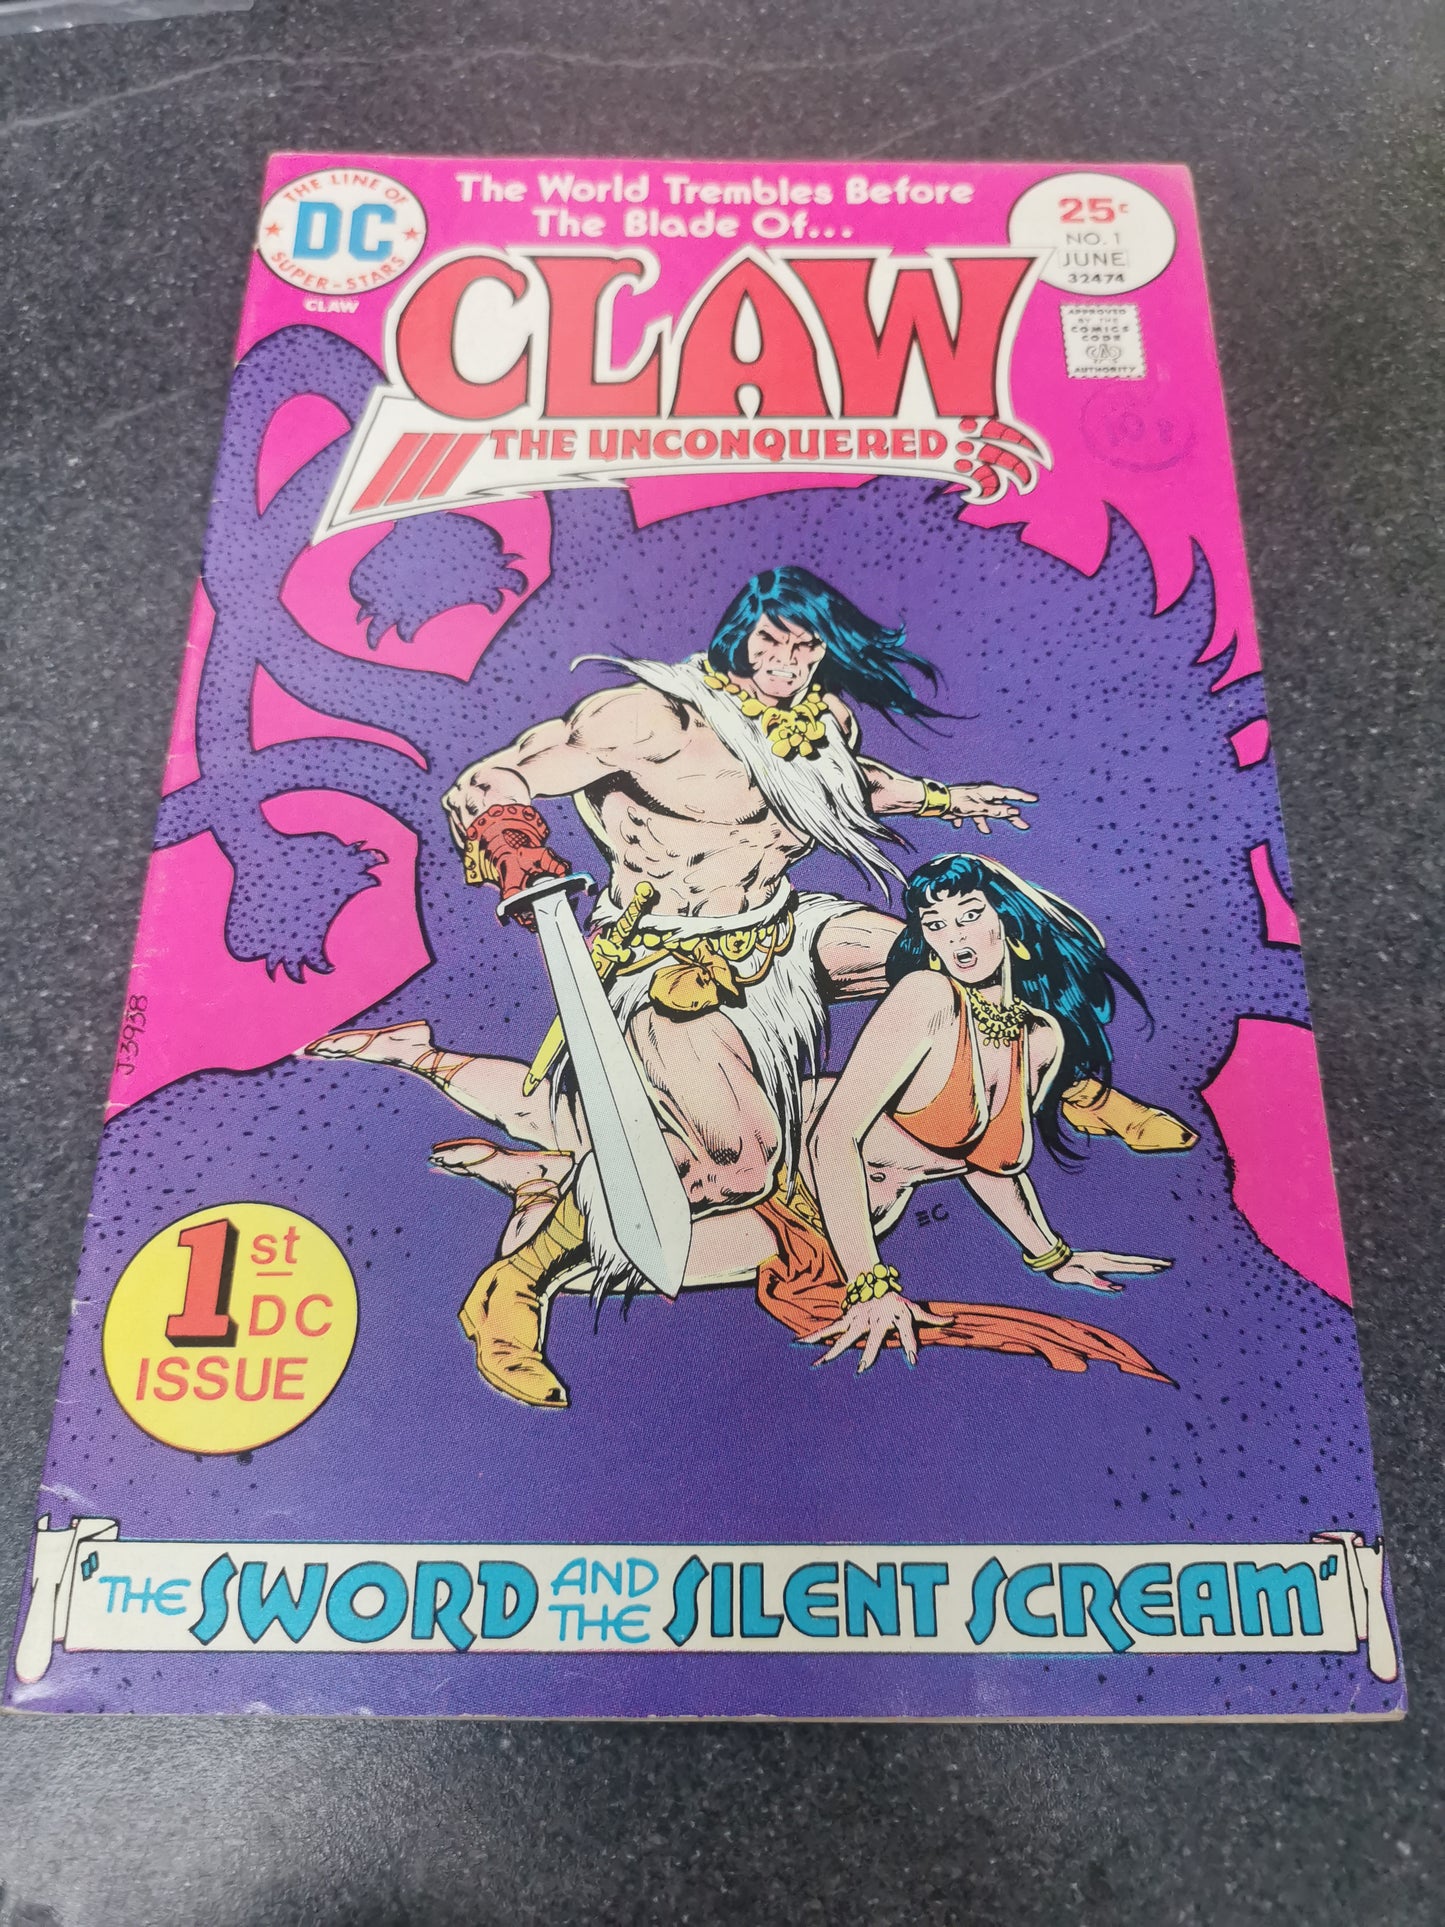 Claw The Unconquered #1 1975 1st appearance of Claw DC comic